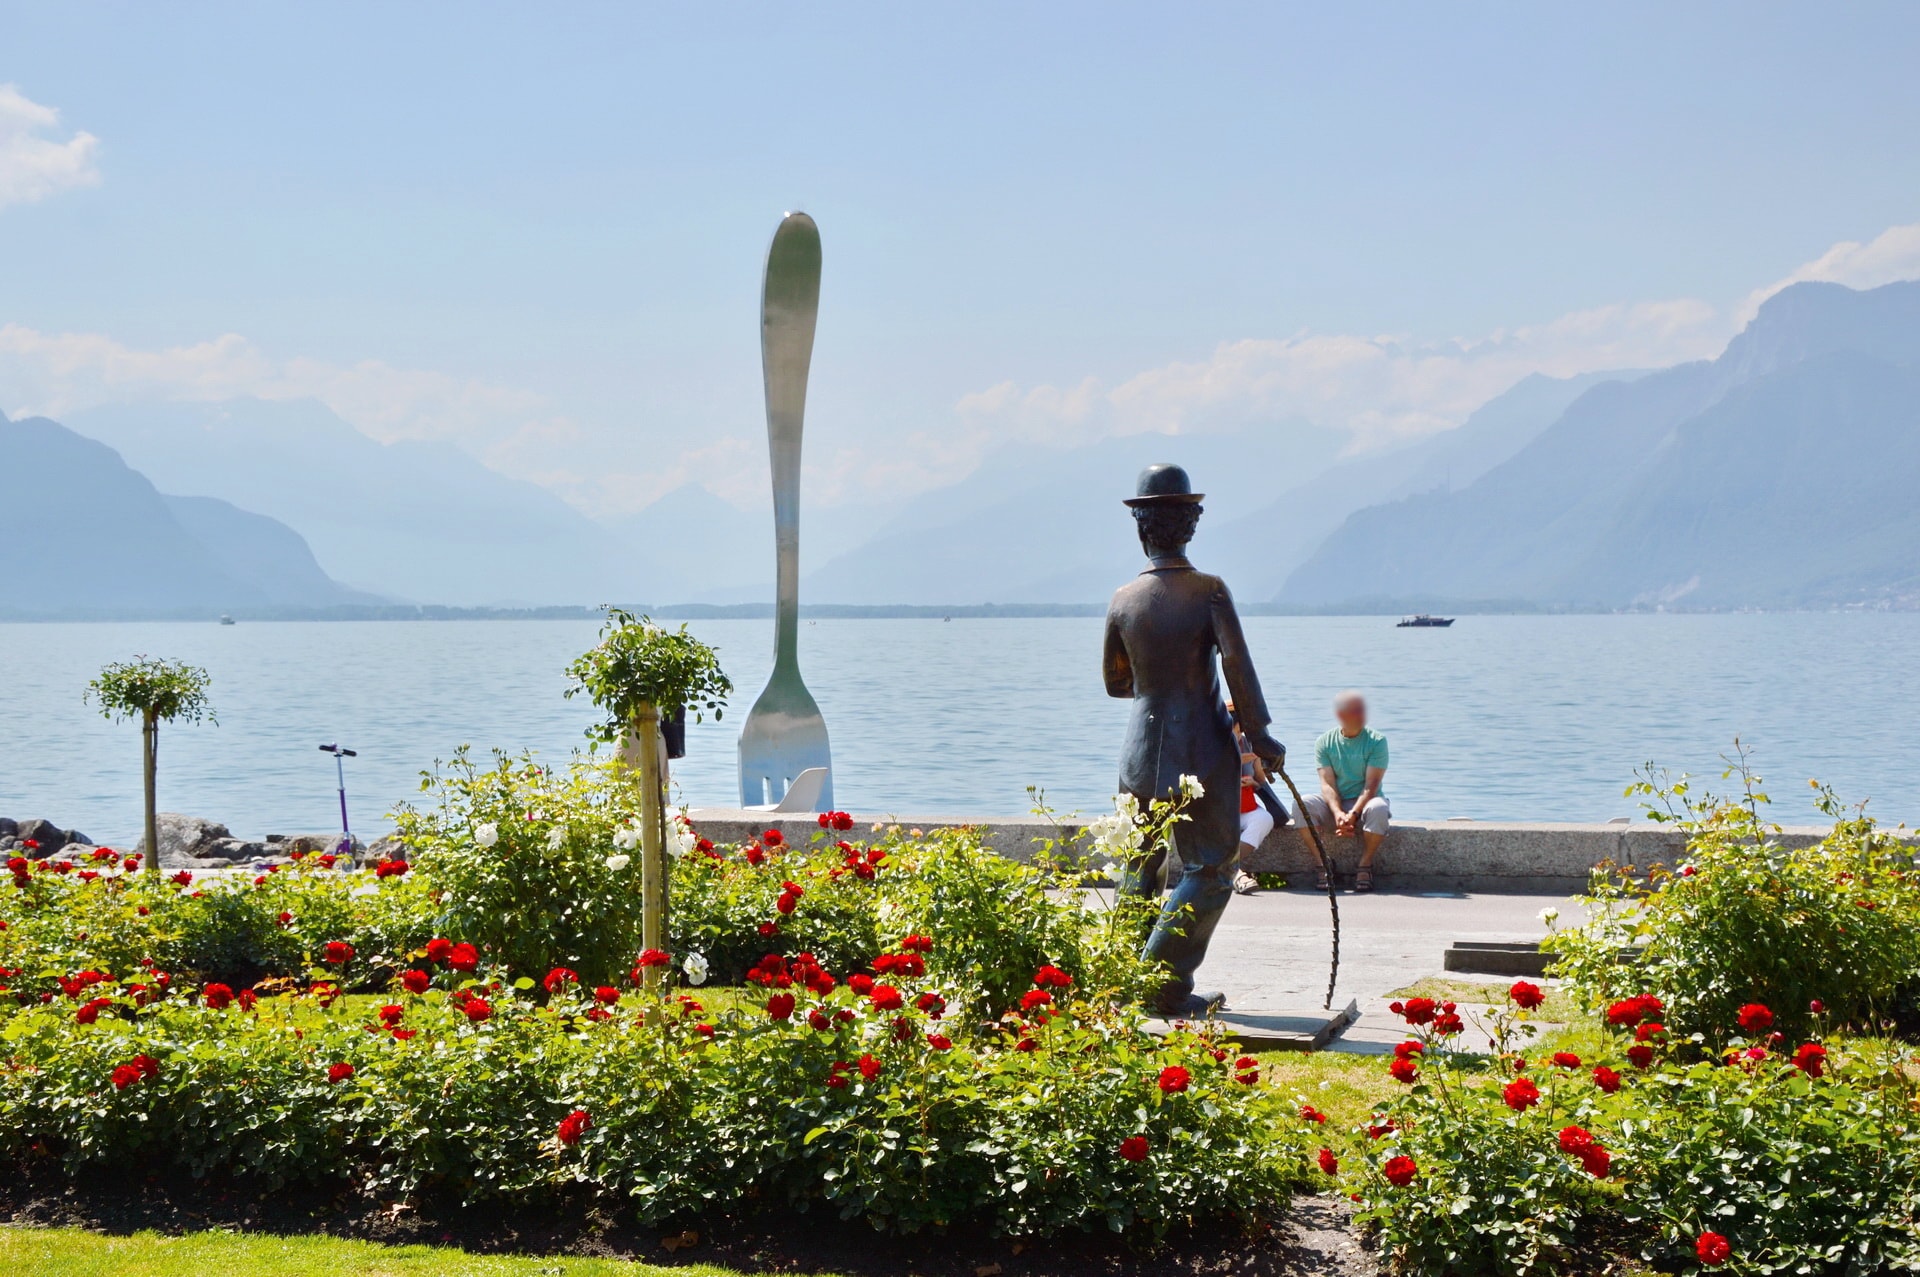 The Fork of Vevey and Charlie Chaplin are the most famous sculptures in Vevey